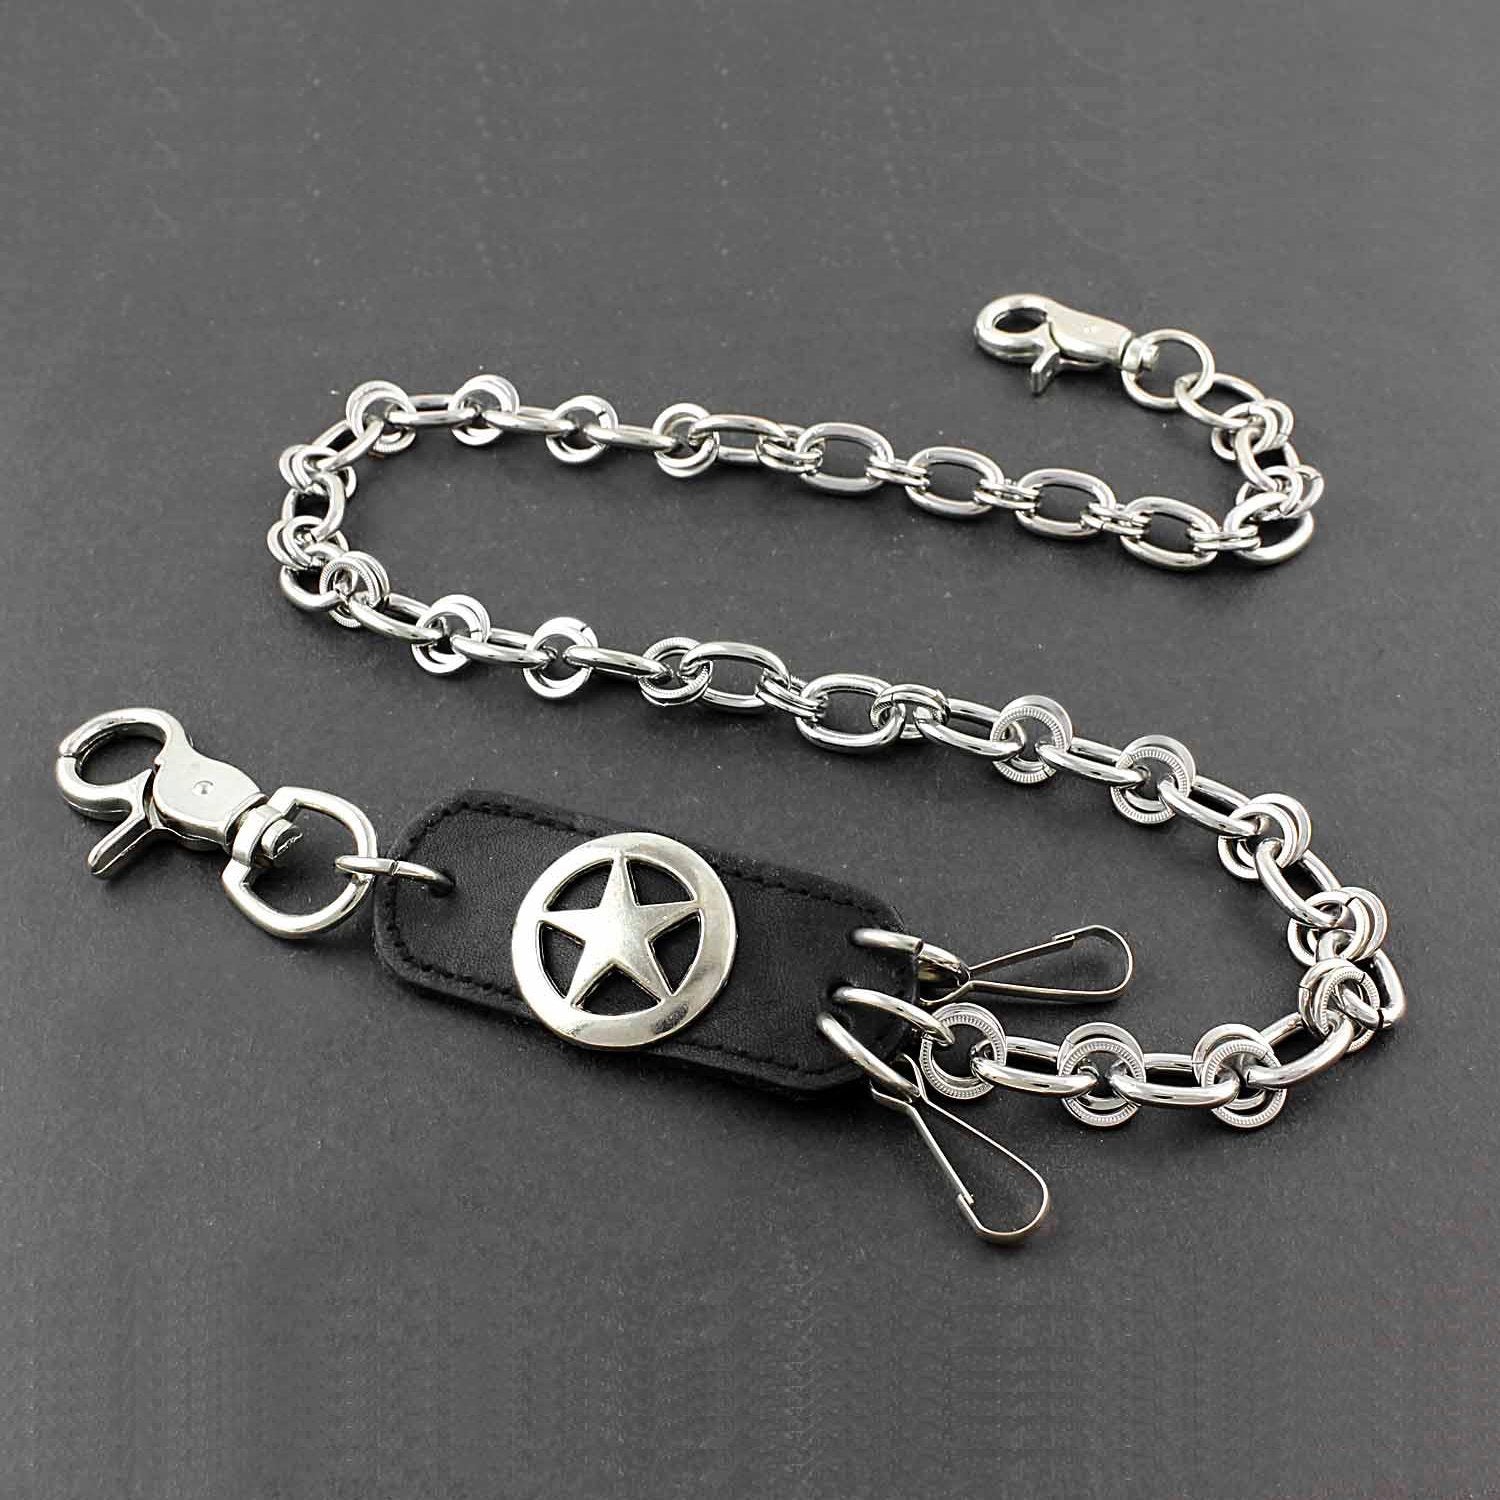 Solid Stainless Steel Star Wallet Chain Cool Punk Rock Biker Trucker Wallet Chain Trucker Wallet Chain for Men